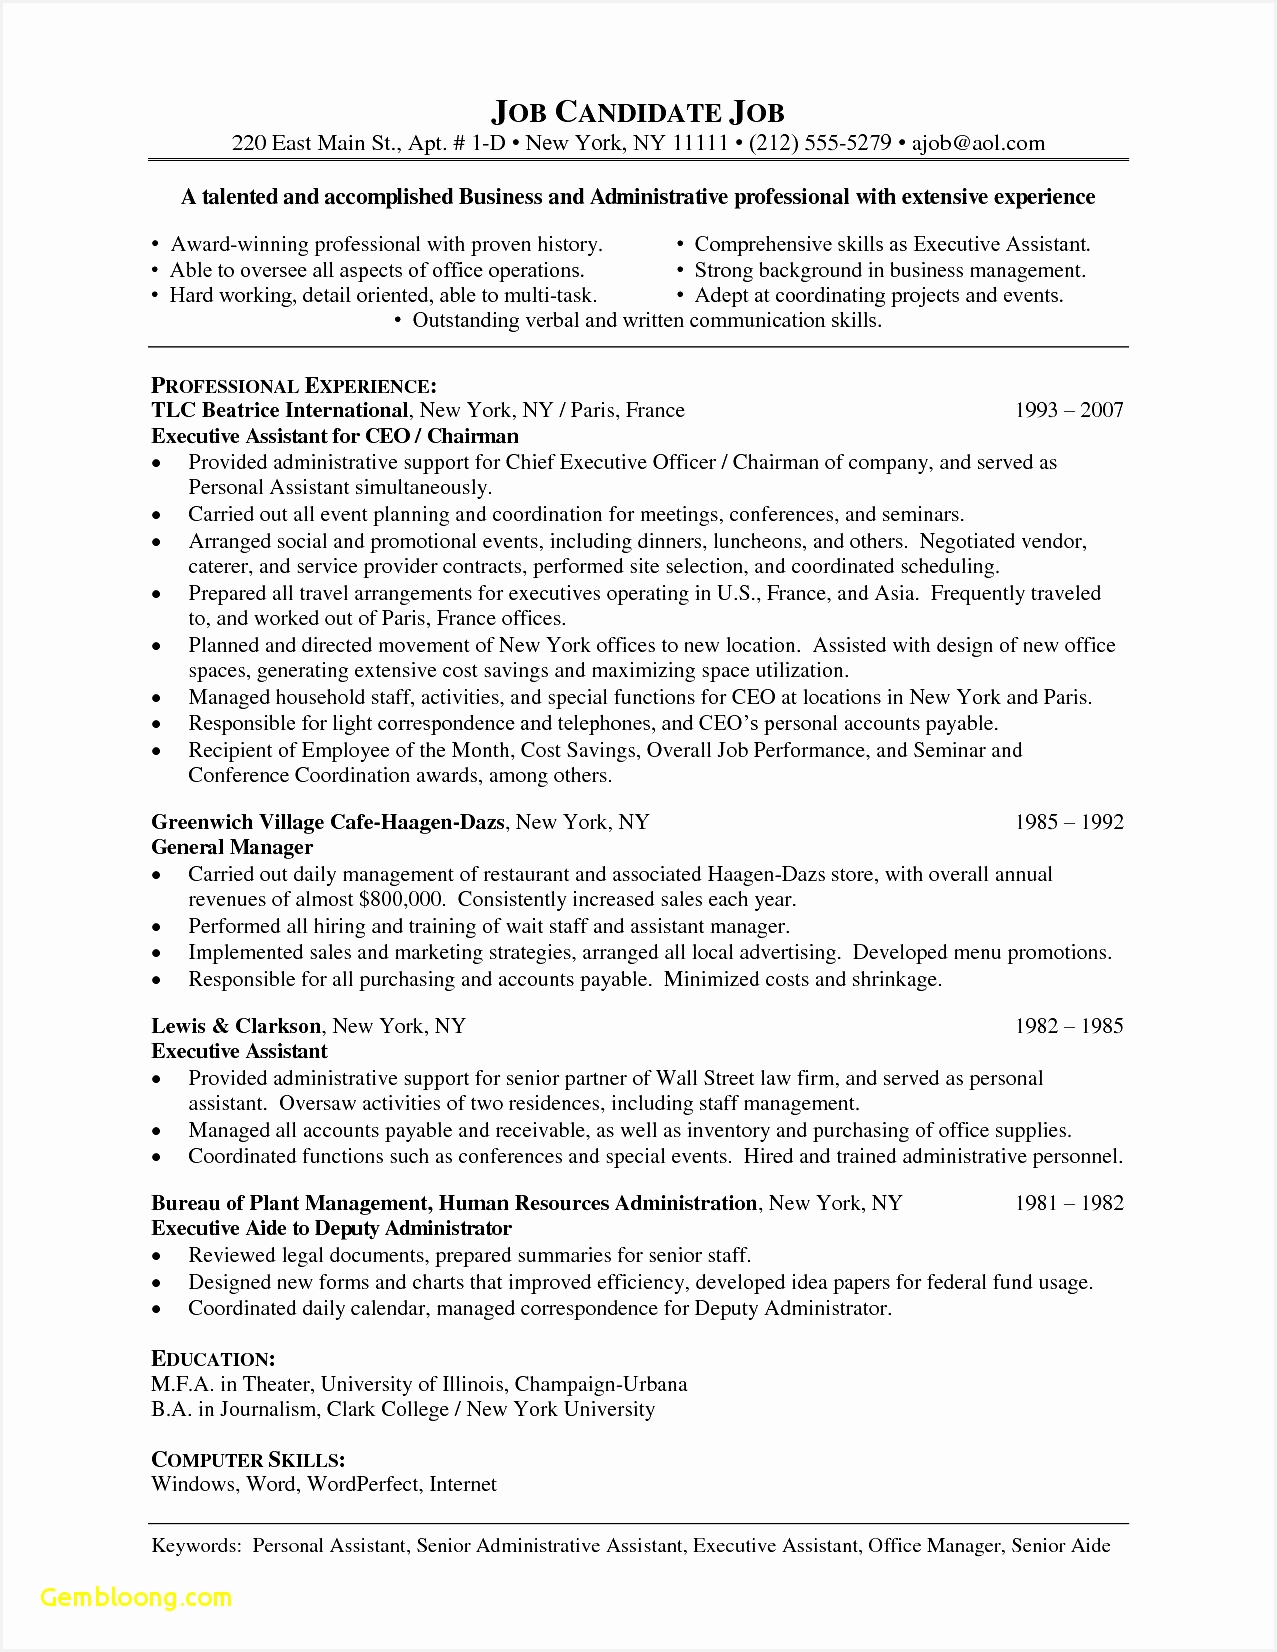 Template for Resume Word New Executive Resume Templates Word Od Specialist Cover Letter Lead16521277